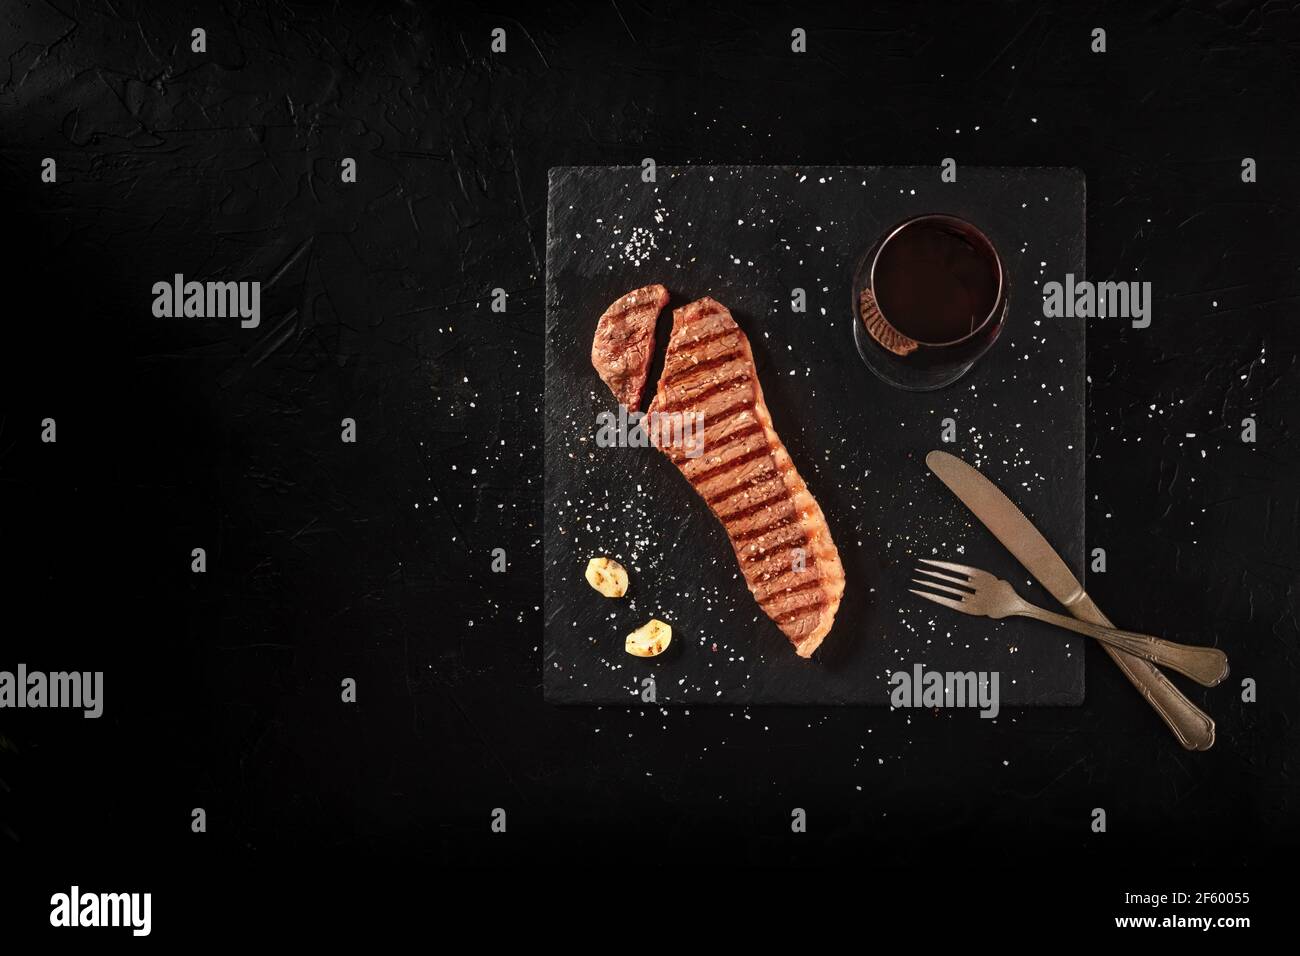 Cooked strip steak, cut, shot from above on a black background Stock Photo